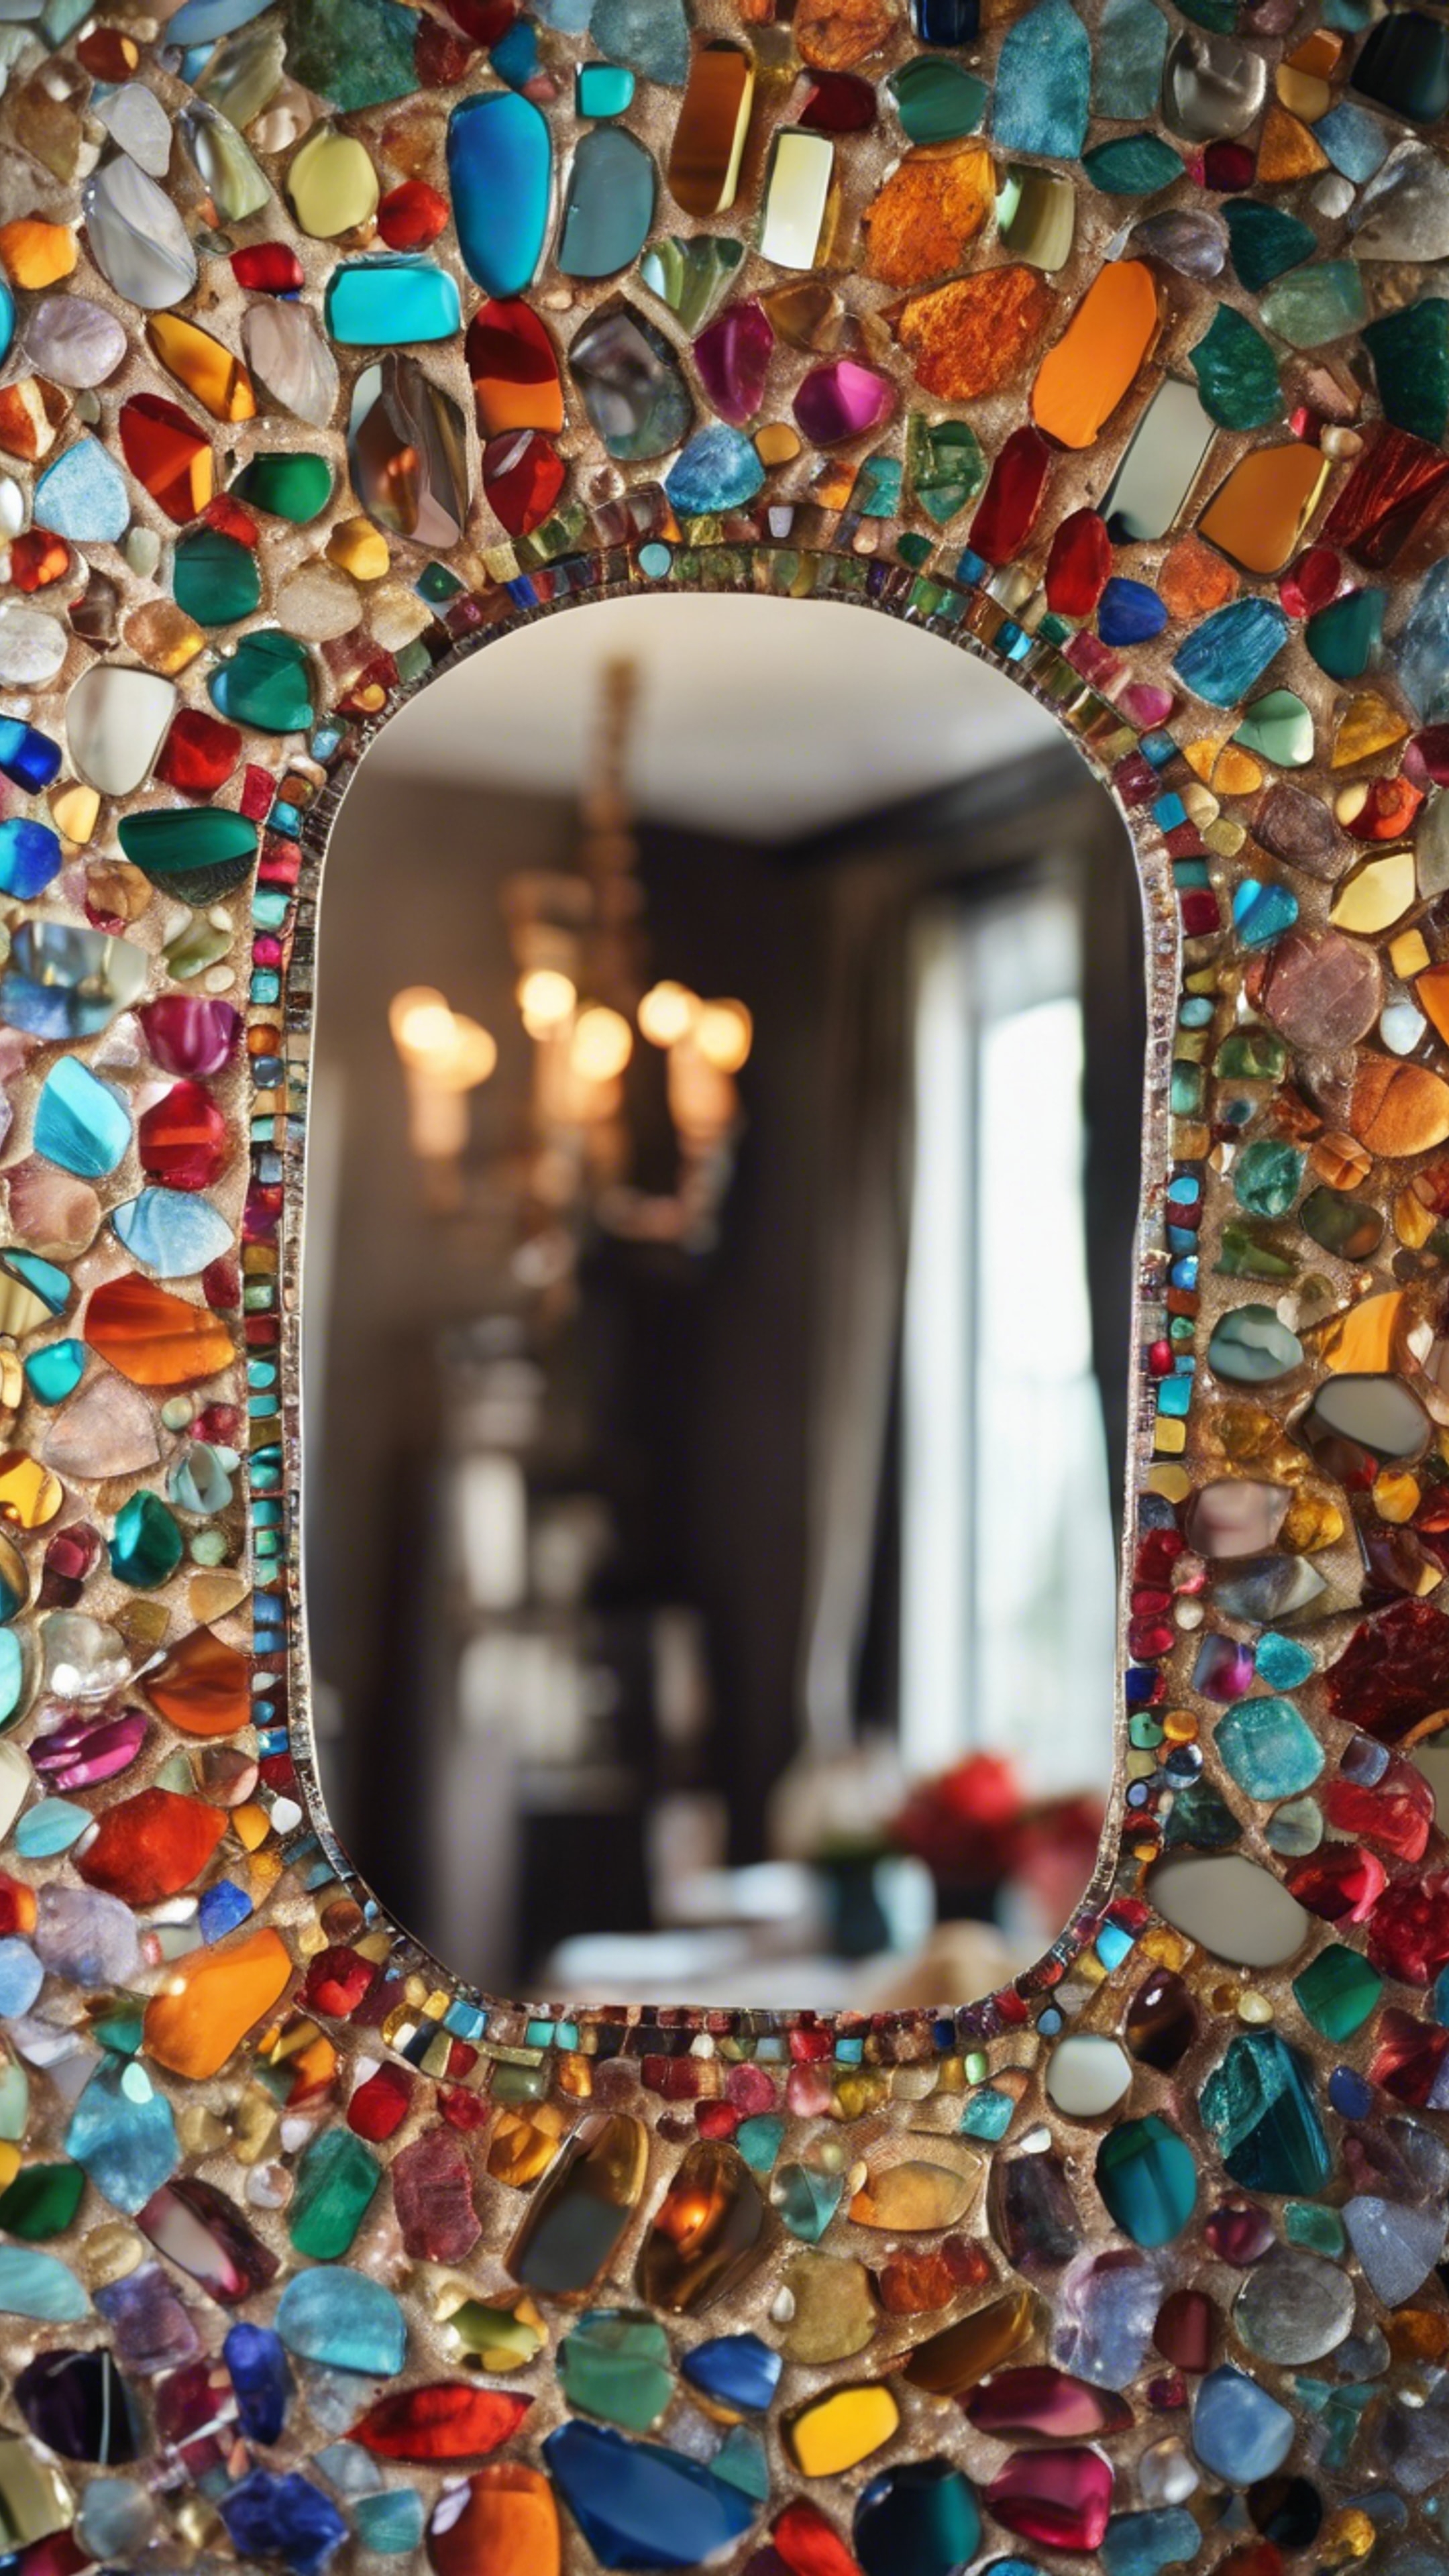 Handcrafted mosaic mirror with colorful glass pieces, reflecting a sunny boho-chic interior.壁紙[2b4a557ca8ad453390e2]